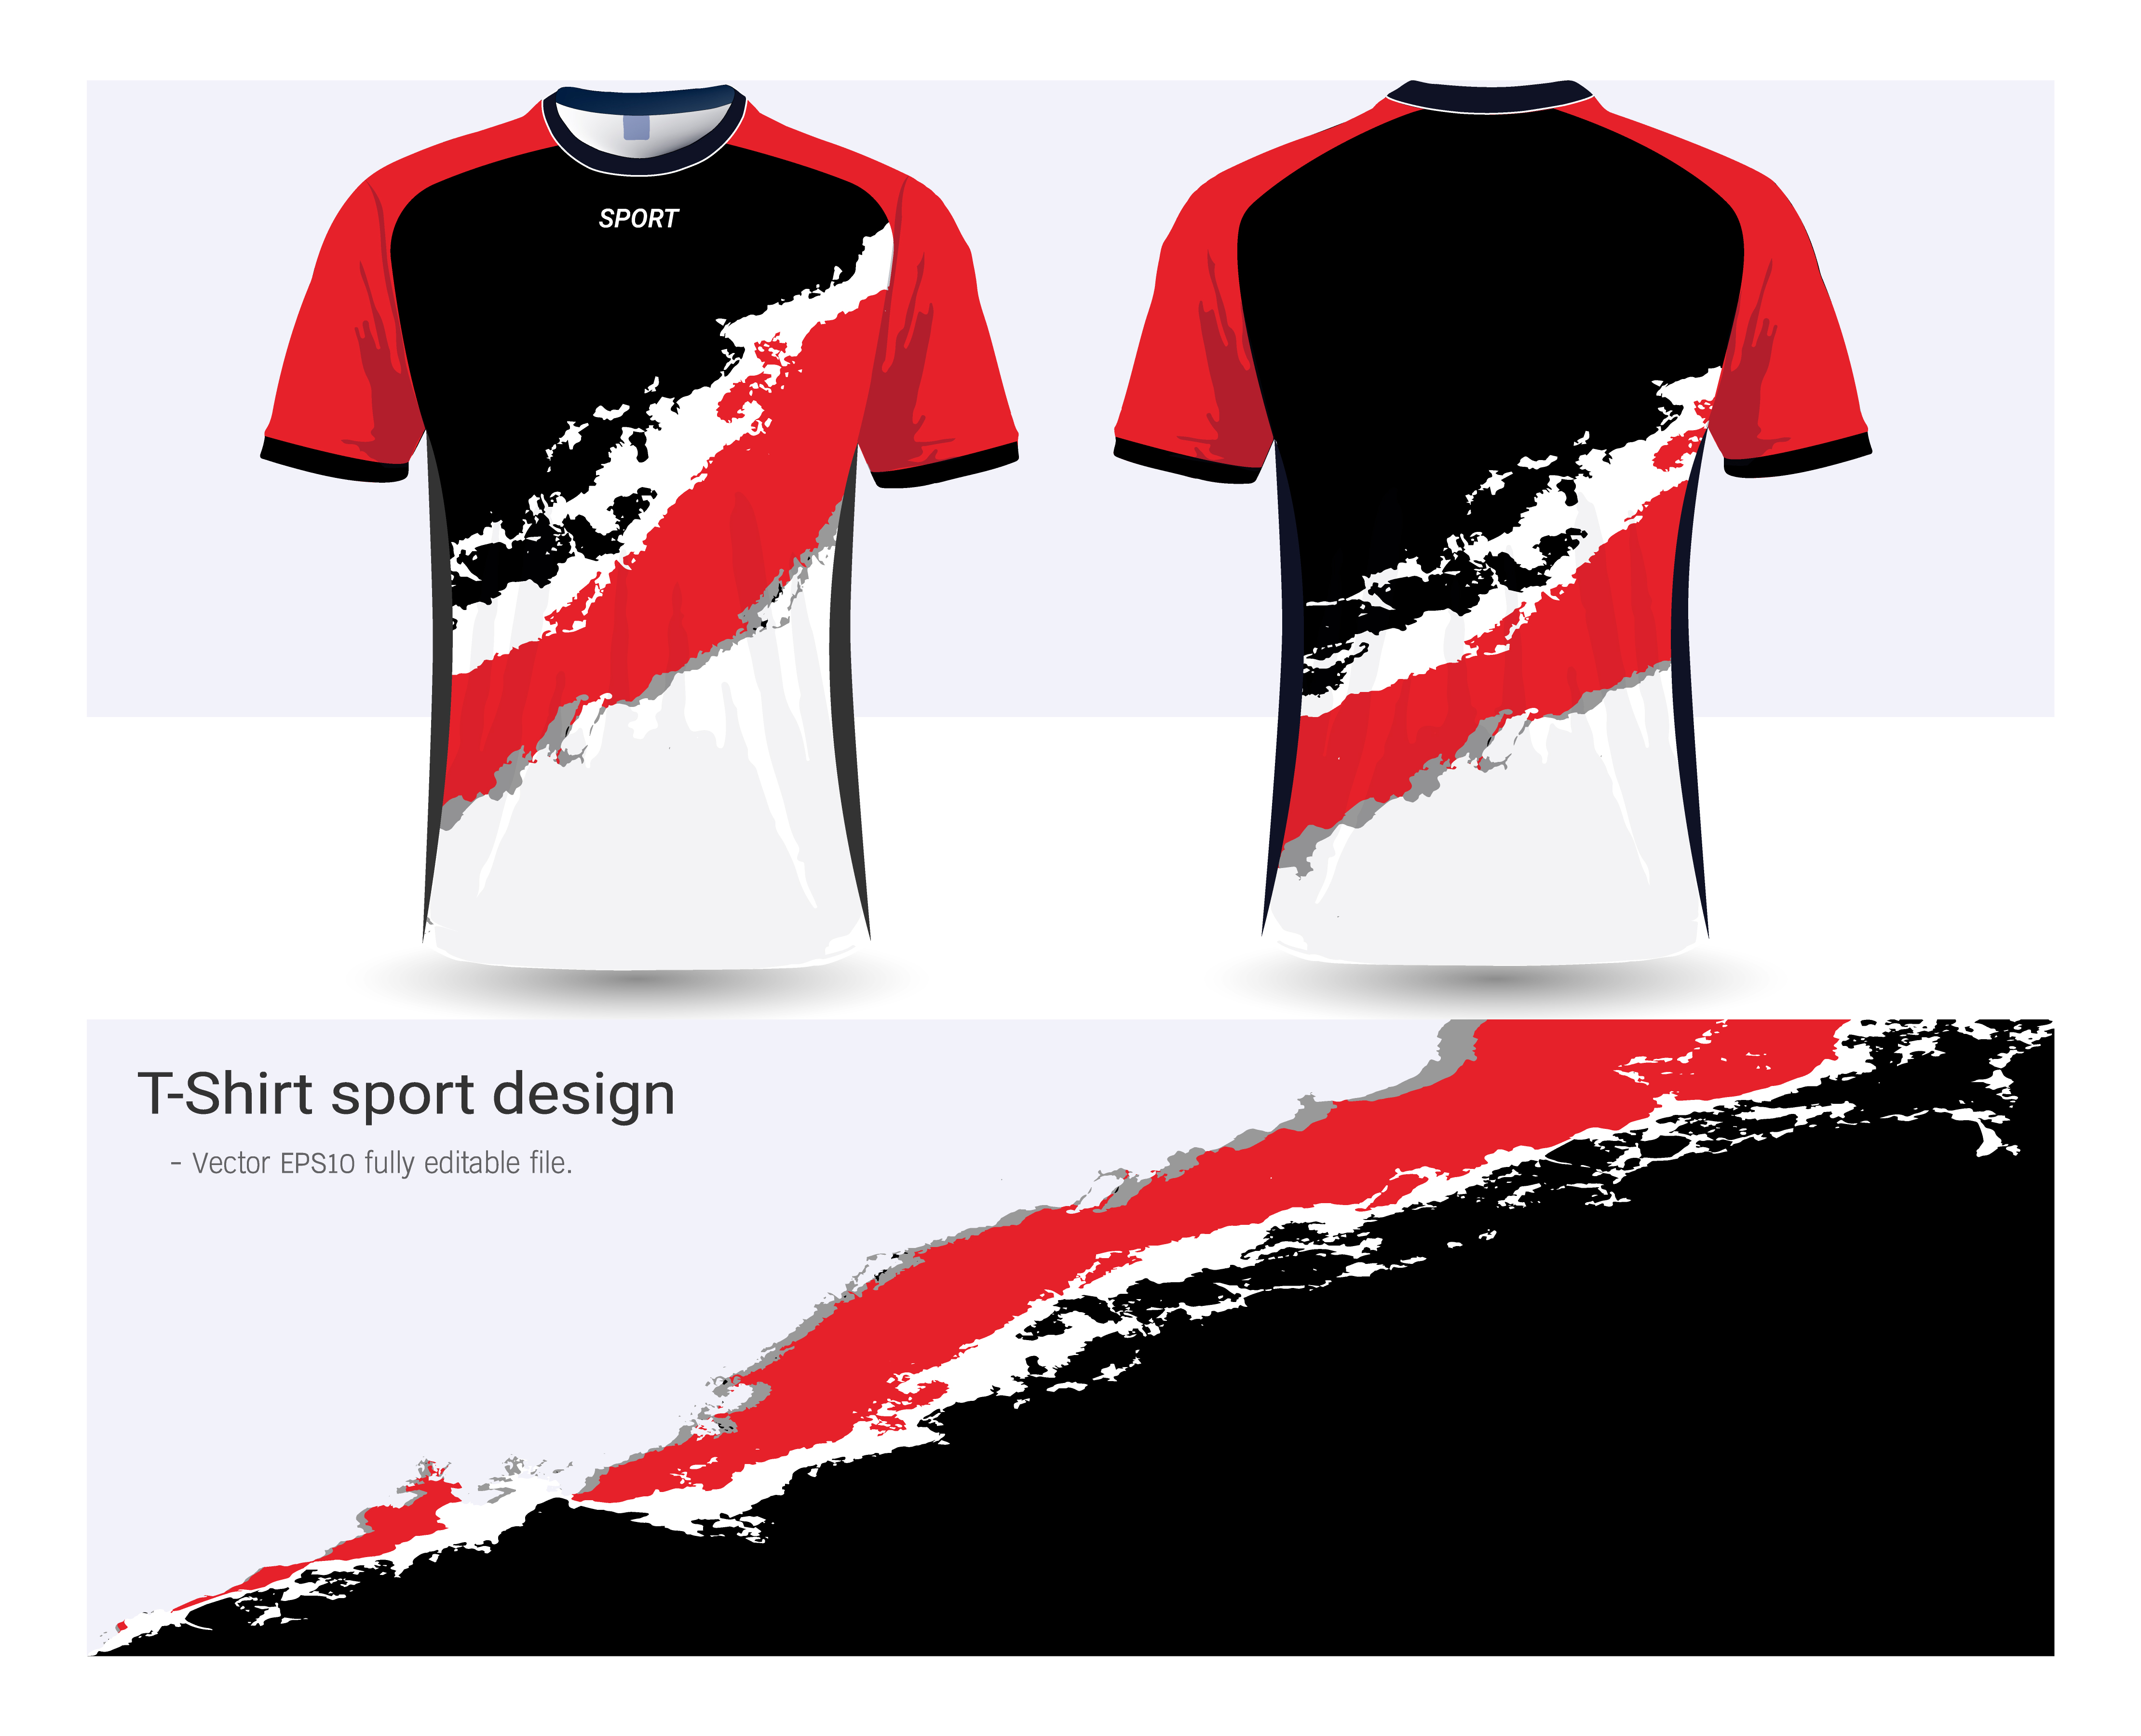 Soccer jersey and tshirt sport mockup template, Graphic design for